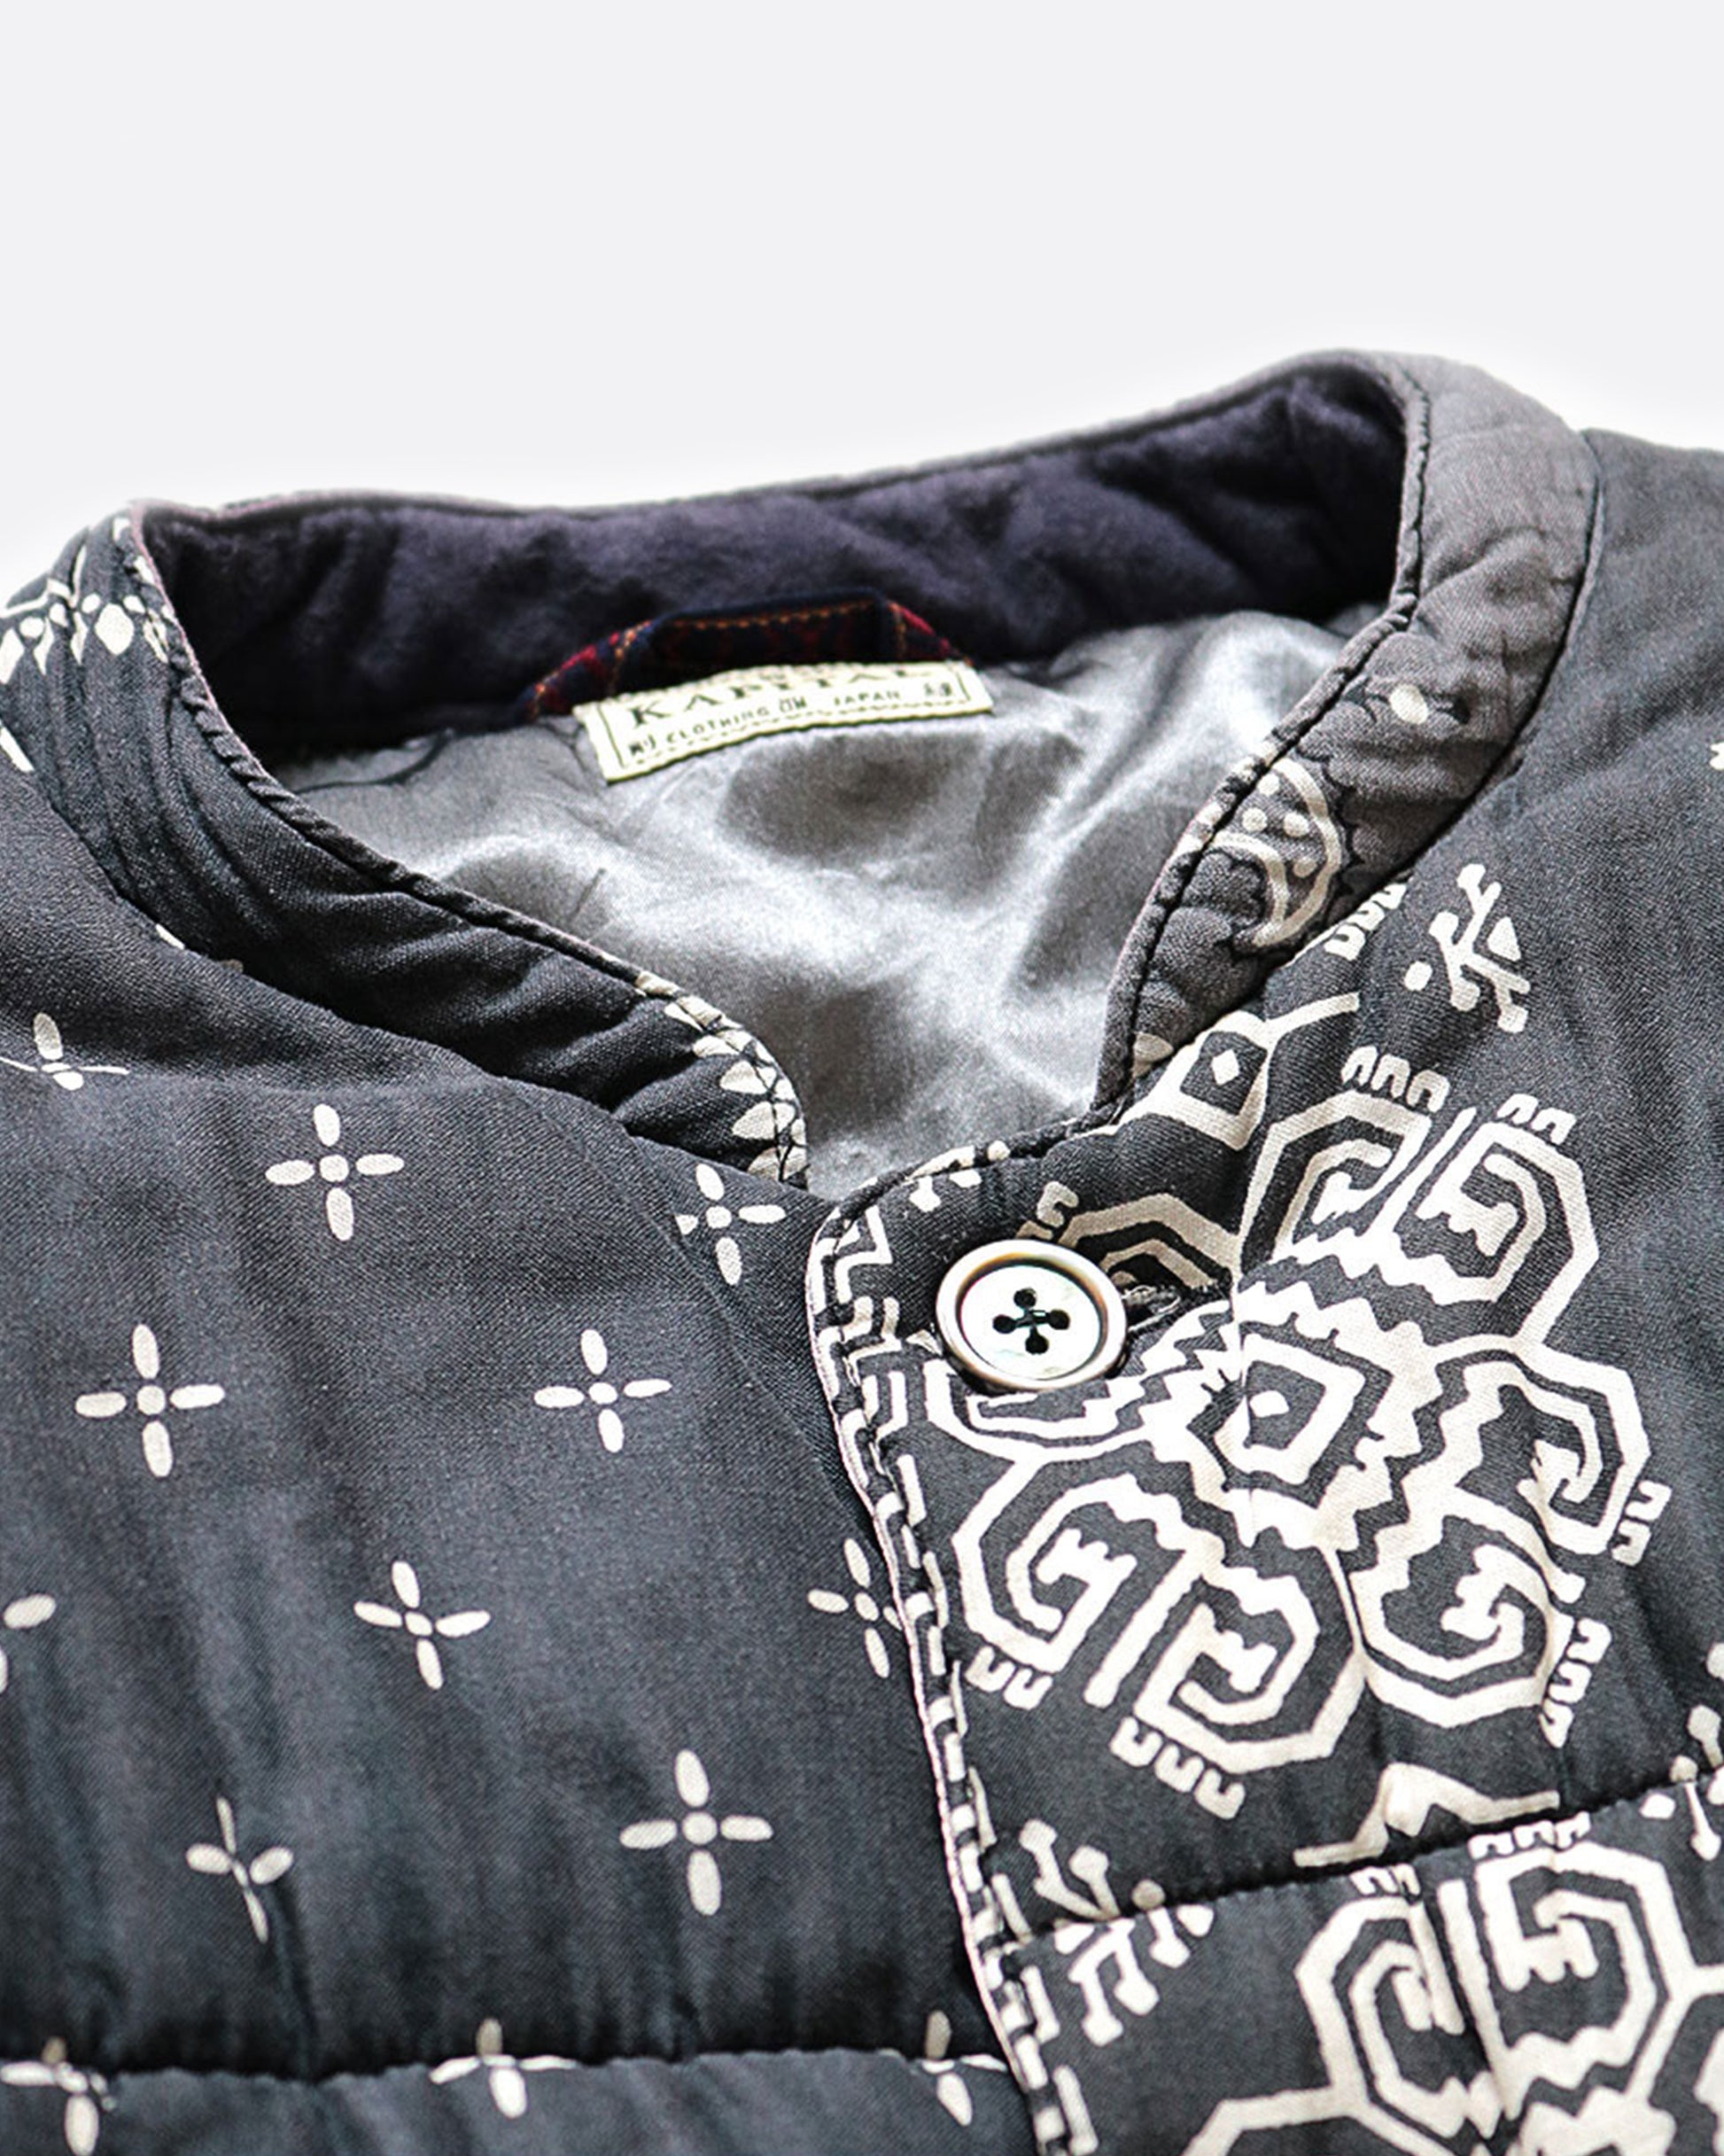 A close up of the collar on the black quilted patchwork bandana jacket.